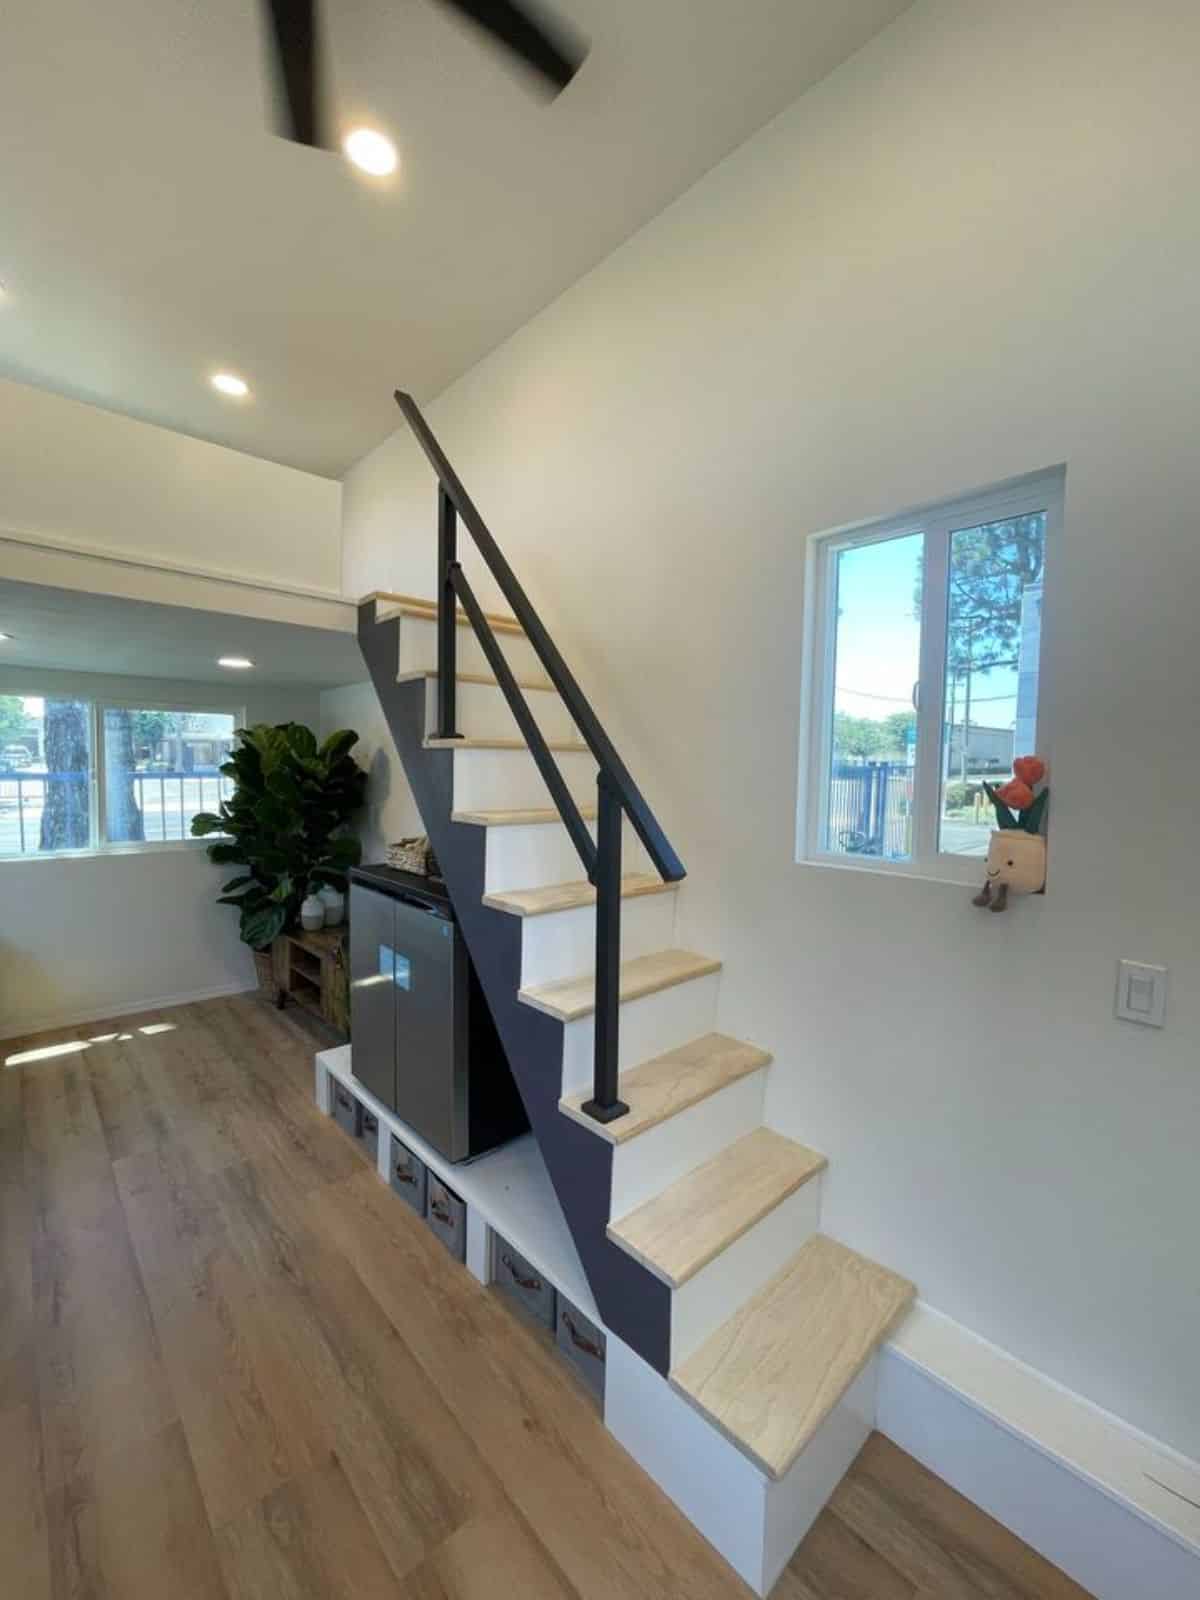 stairs leading to the loft bedroom has a storage cabinets underneath